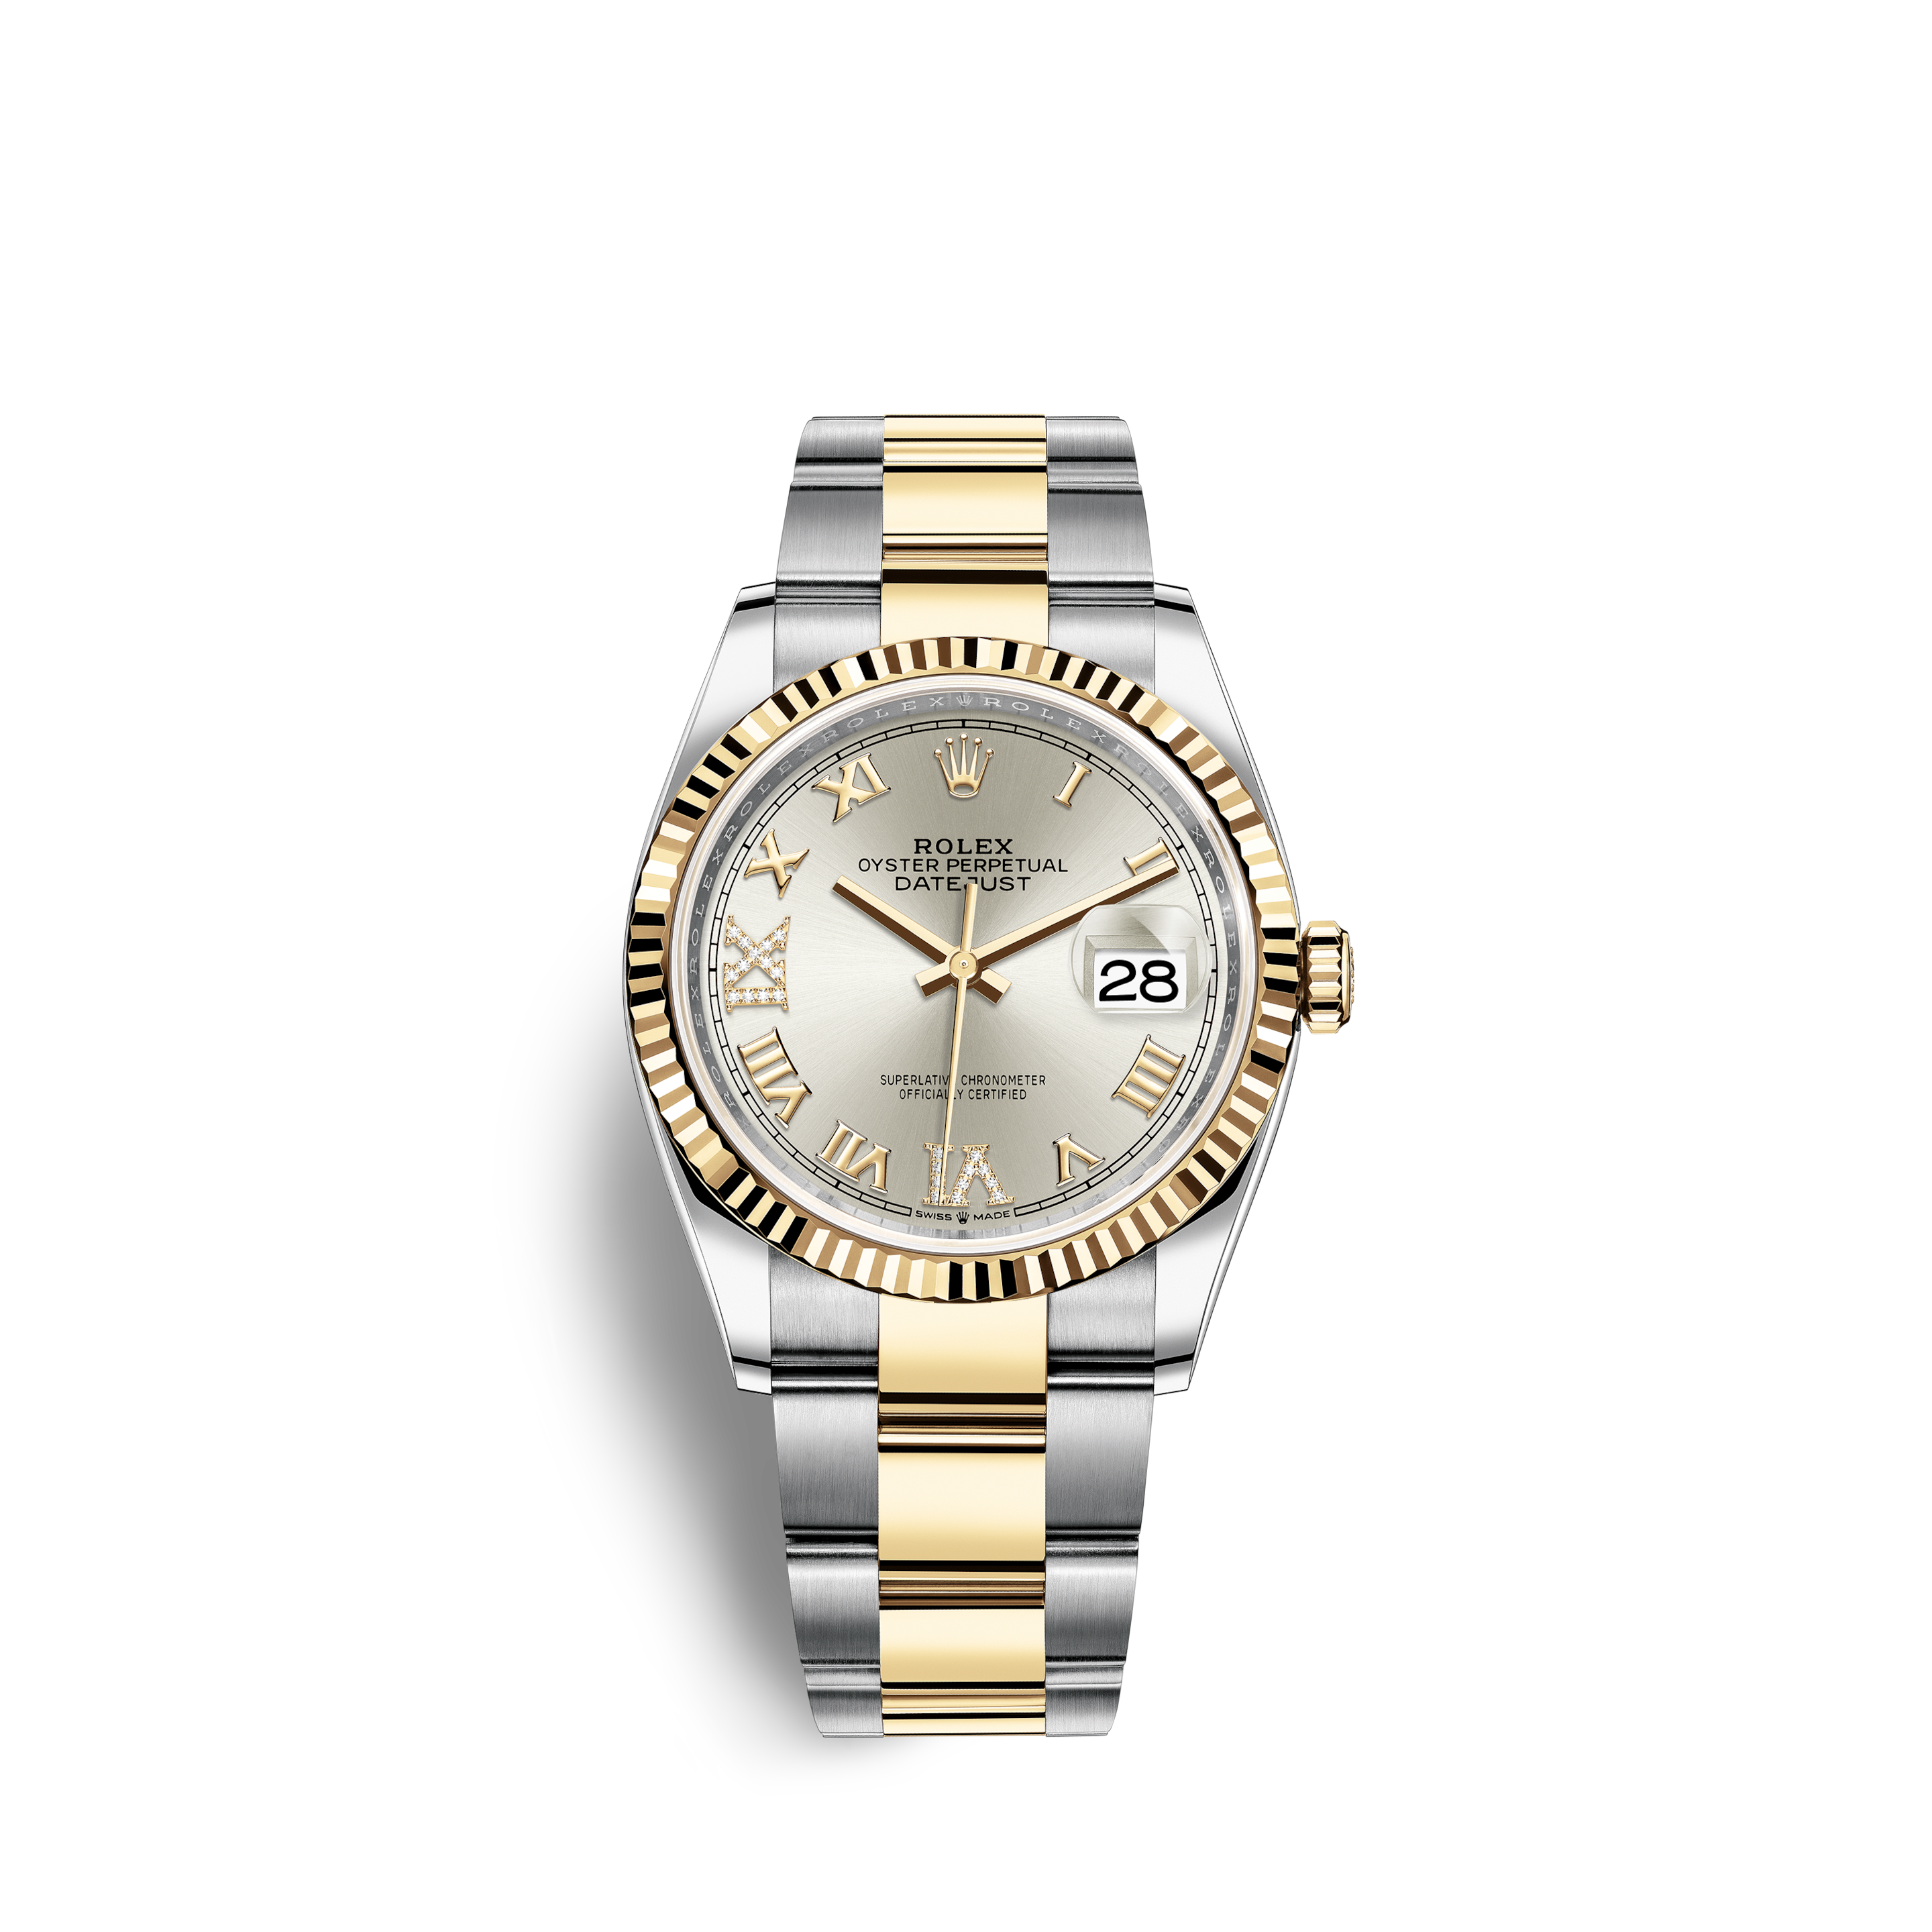 rolex ladies two tone oyster perpetual